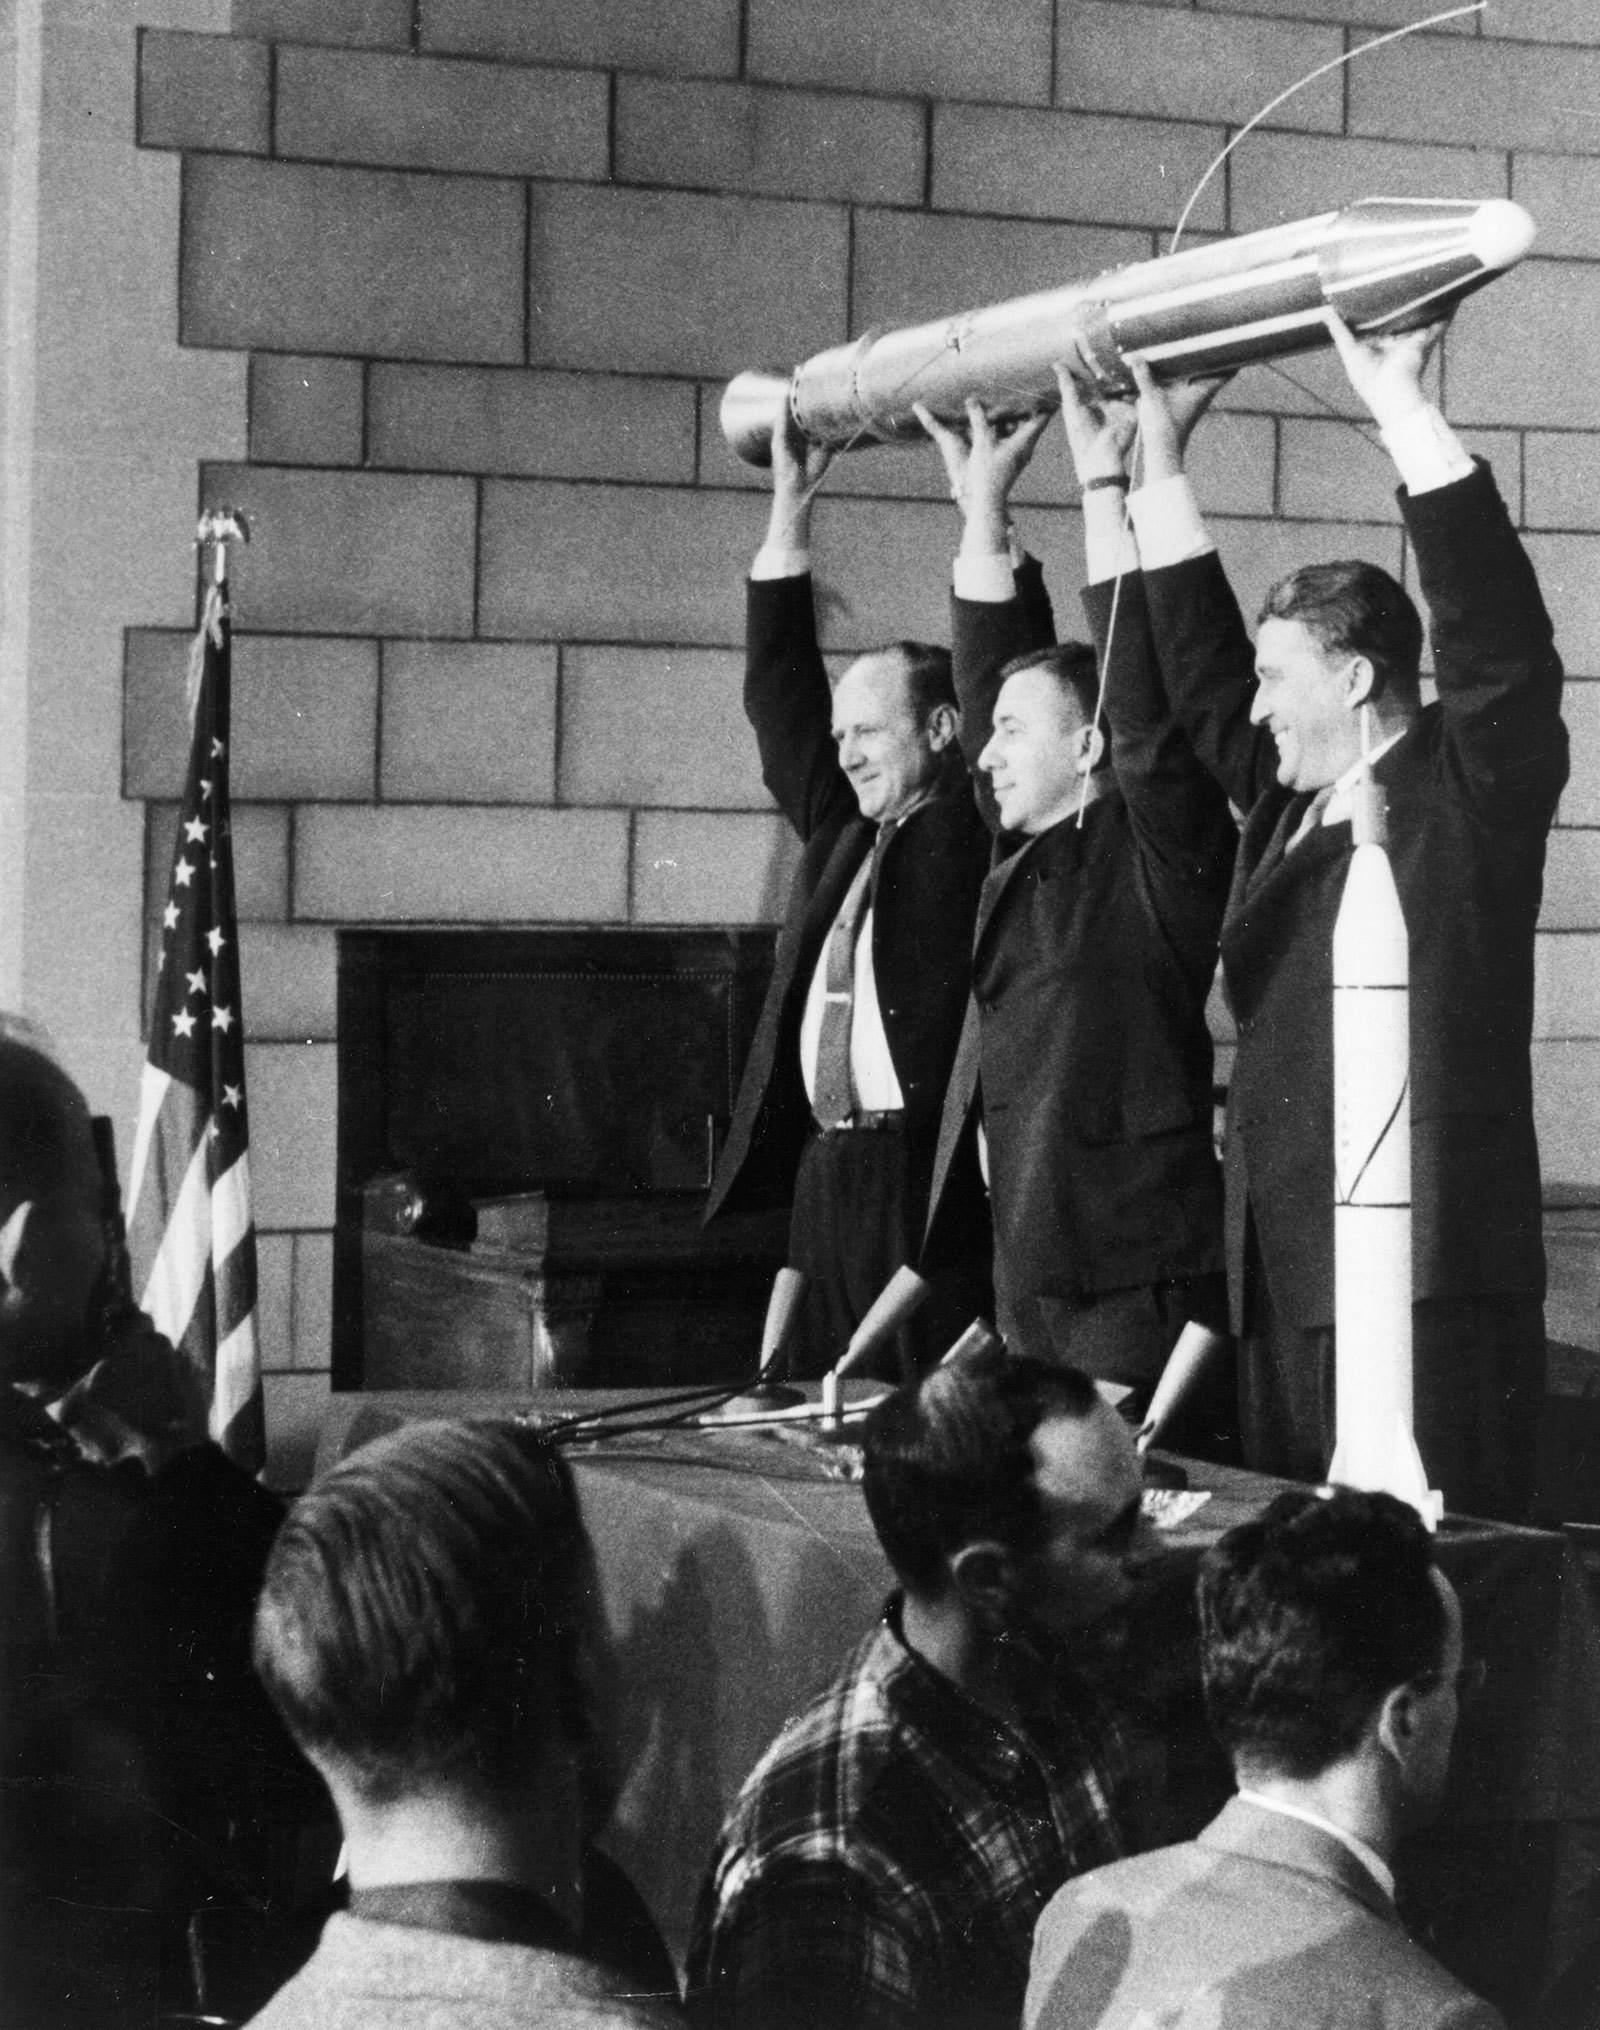 Three smiling men holding spacecraft model above their heads.